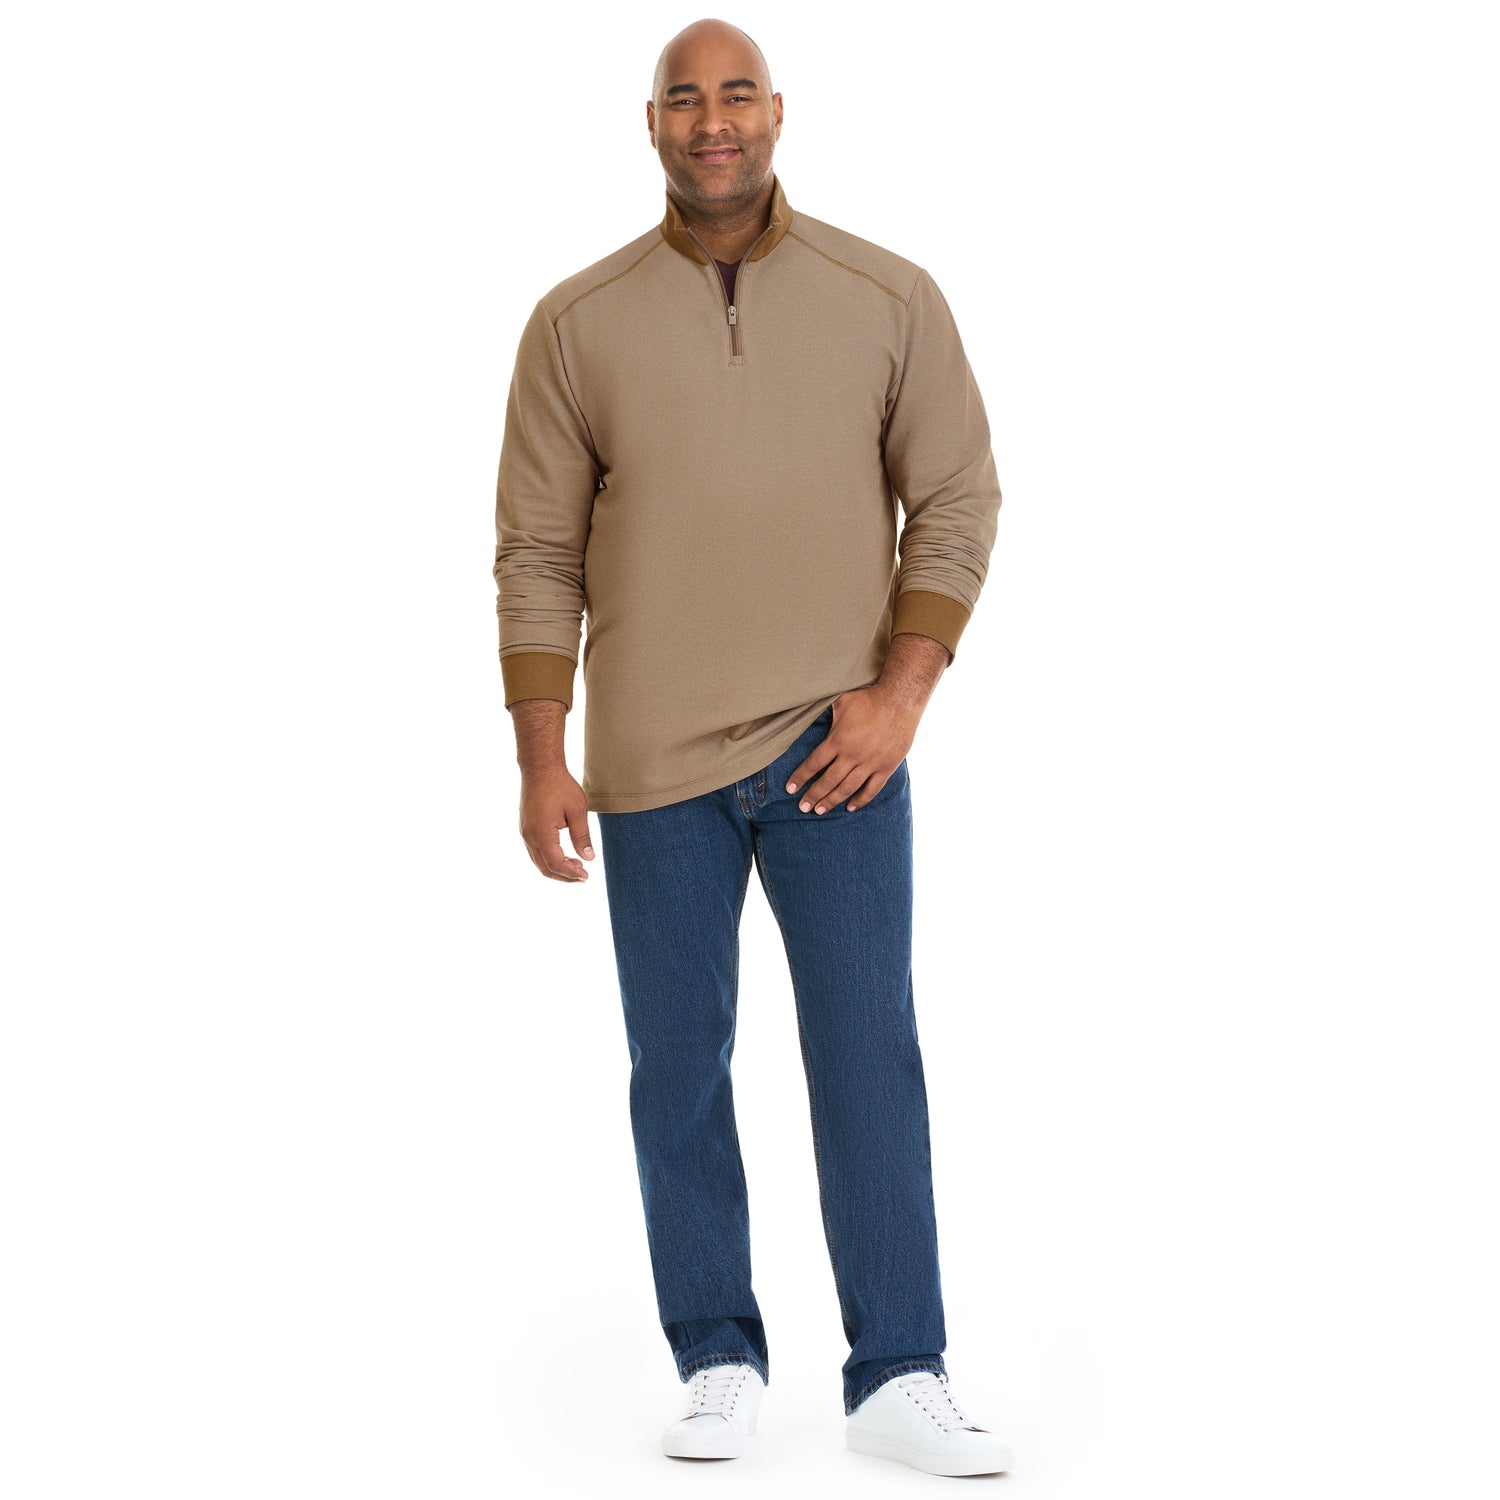 Essential Stain Shield Pique Quarter Zip Pullover- Big and Tall